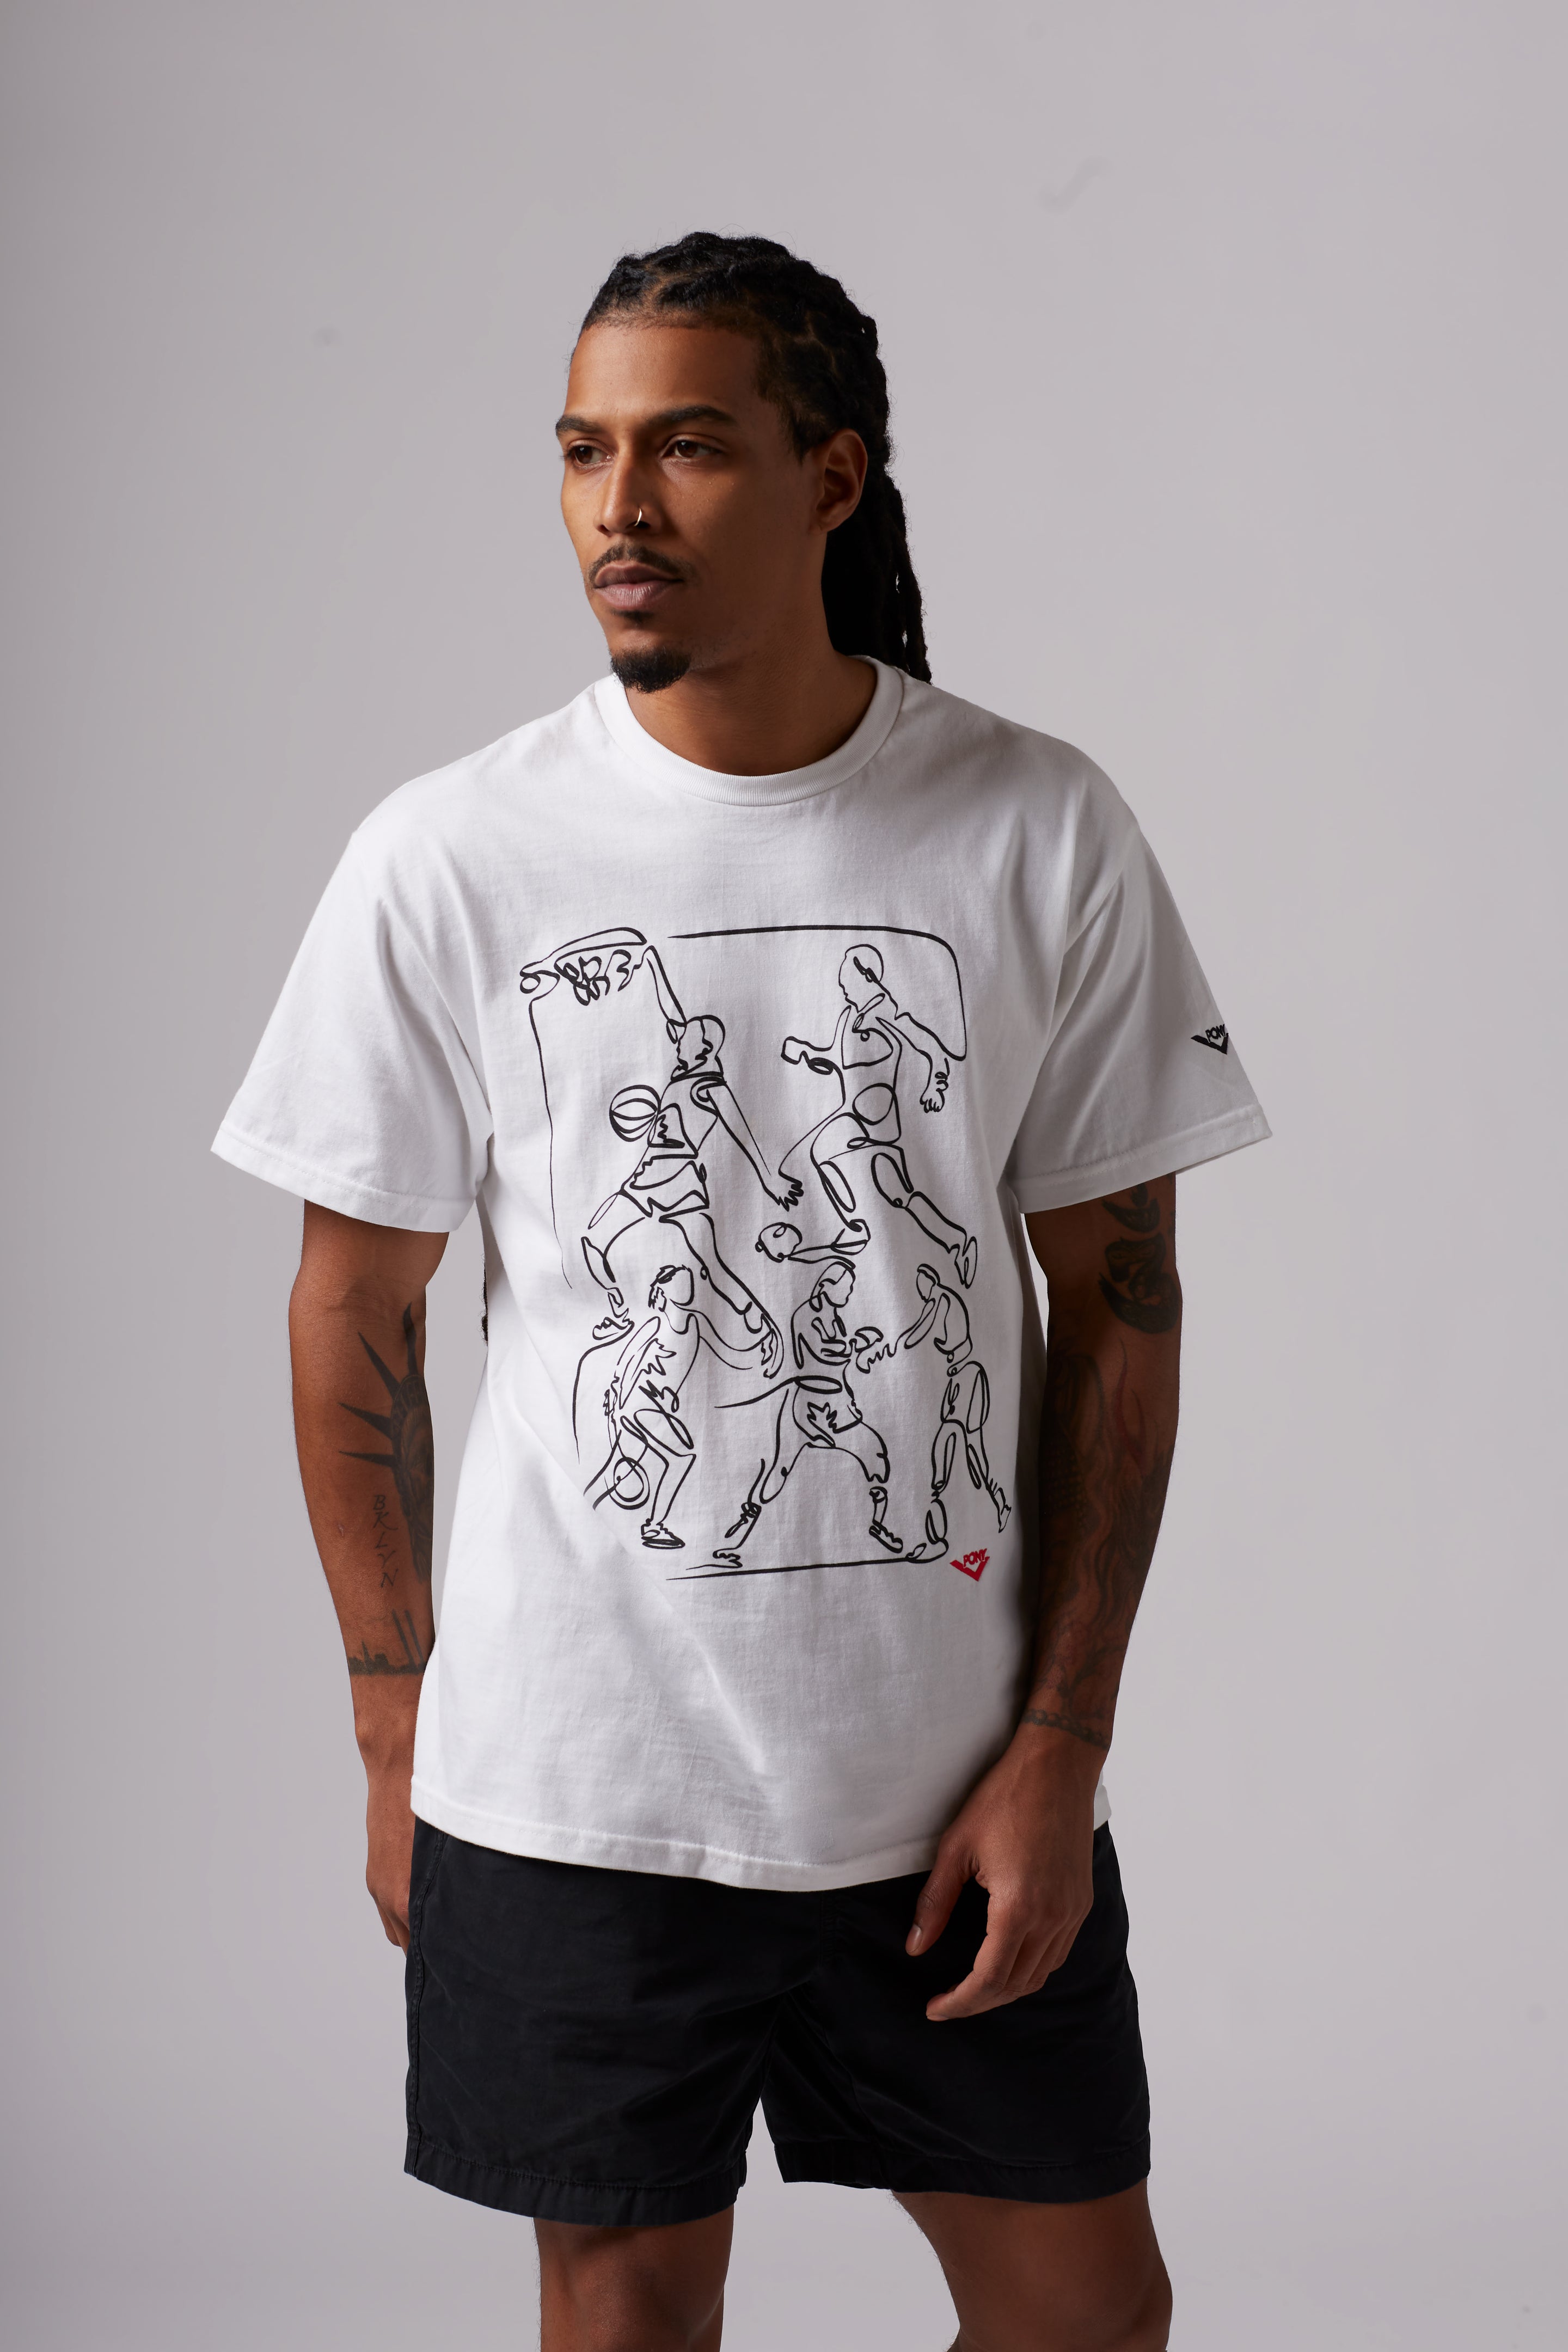 A male model wearing the PONY semicentennial sports tee in white. T-shirt features a figurative style line drawing of basketball players and an embroidered red pony lockup logo at the bottom right.